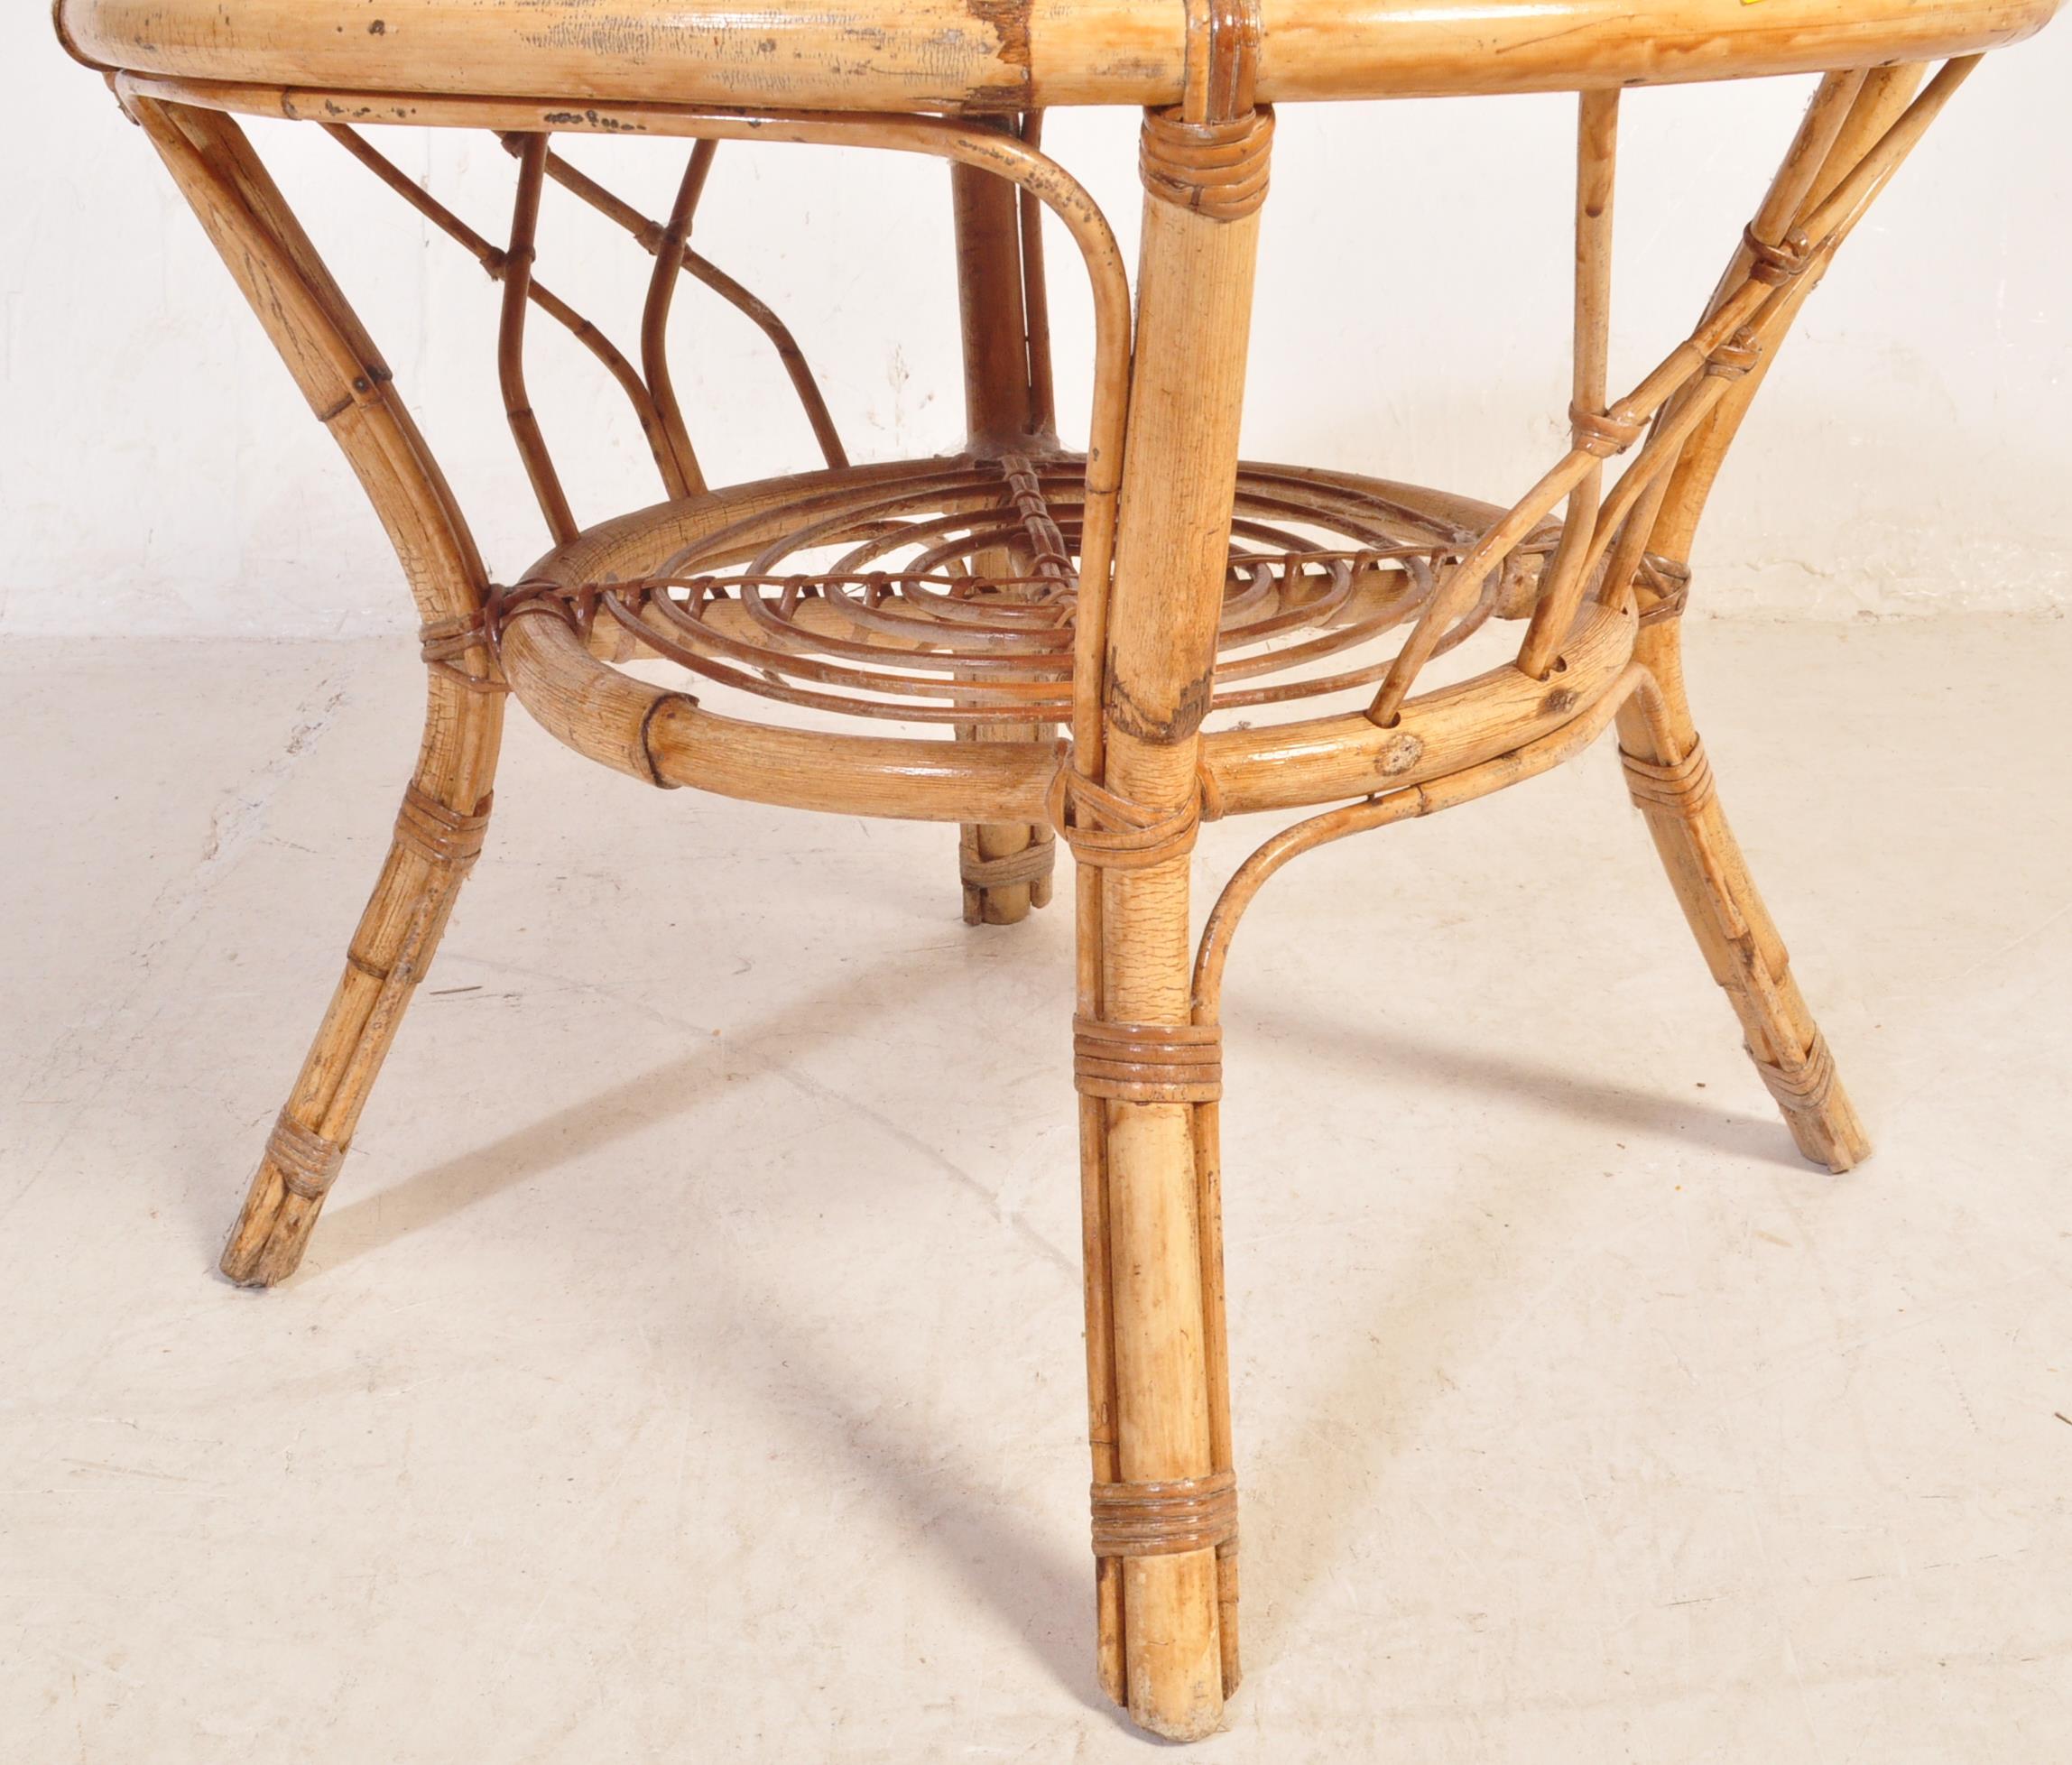 VINTAGE MID CENTURY BAMBOO TABLE & CHAIR - Image 4 of 8